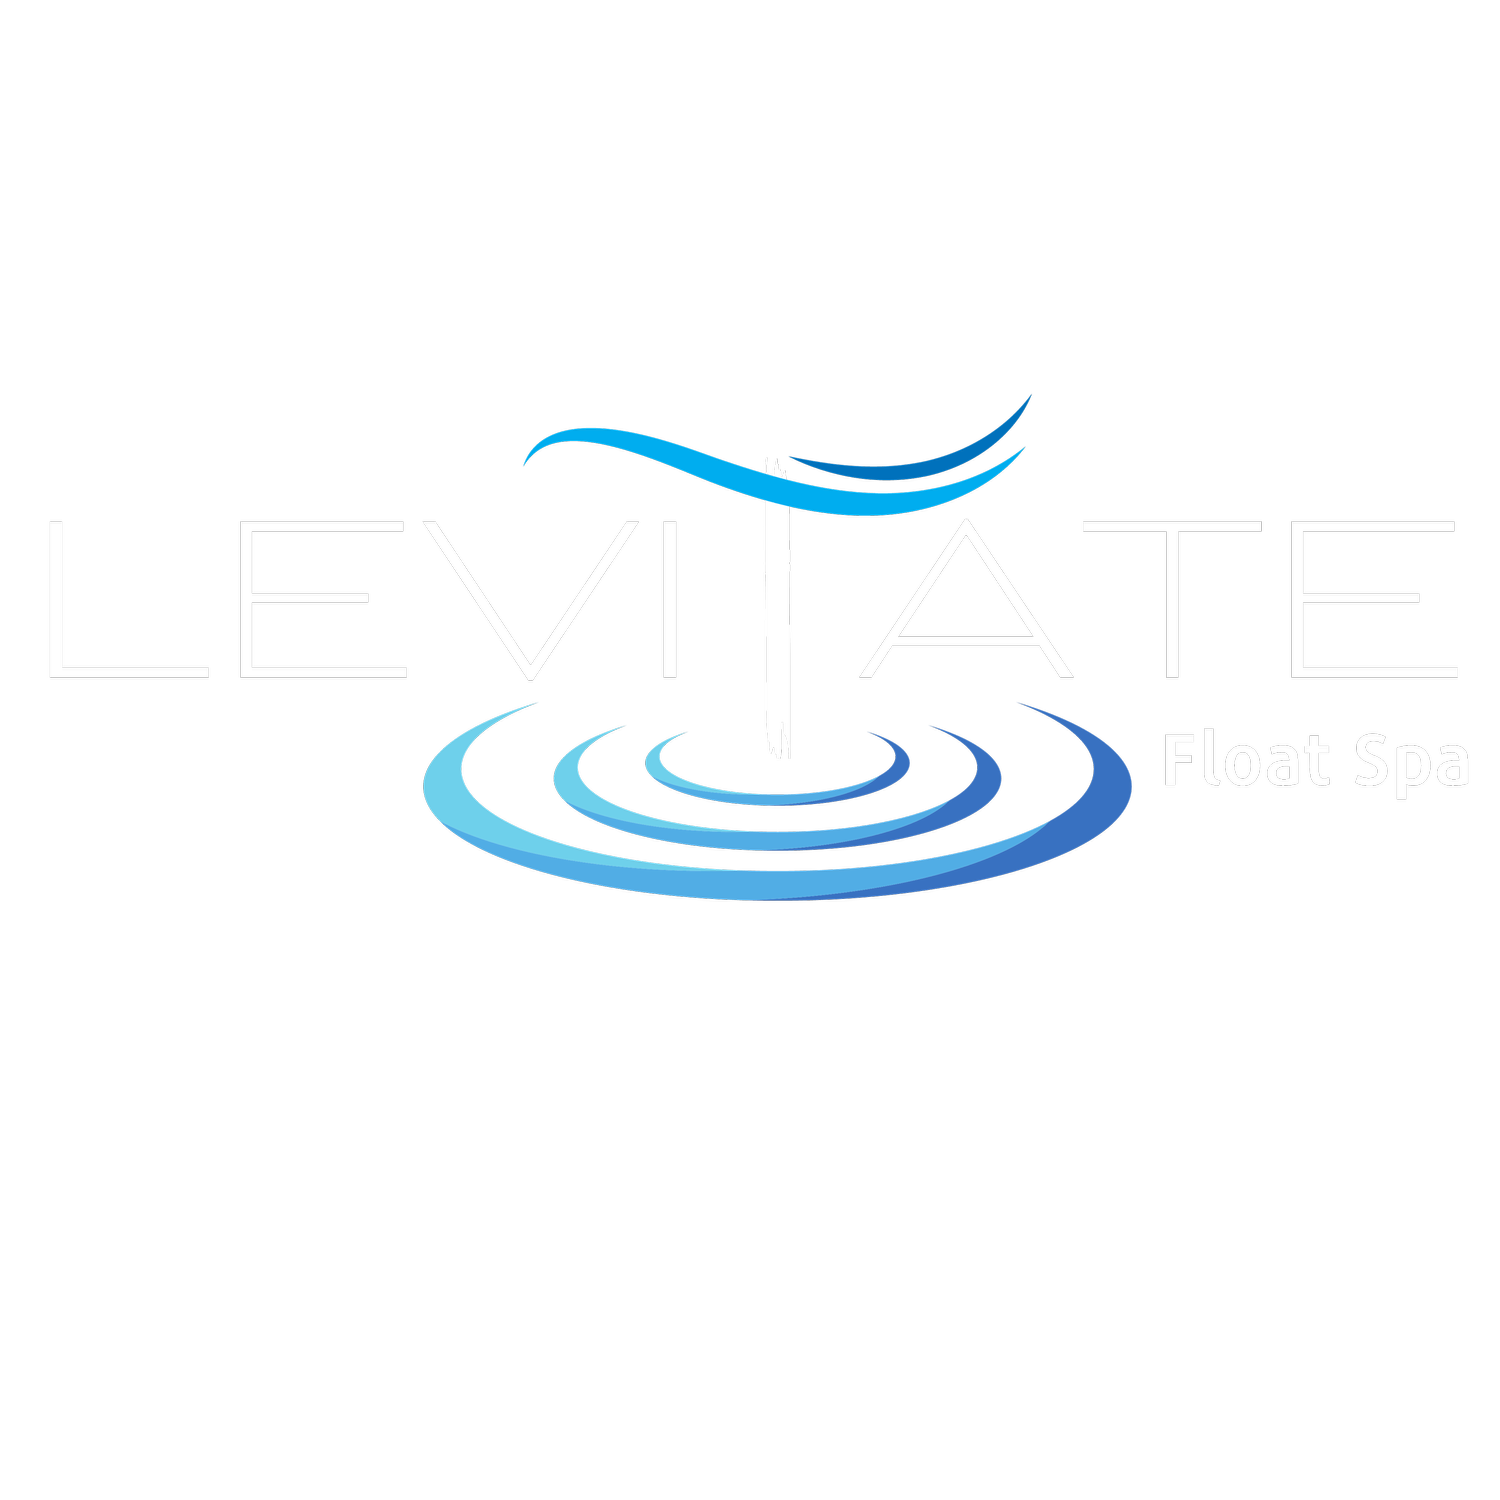 About Levitate Float Spa